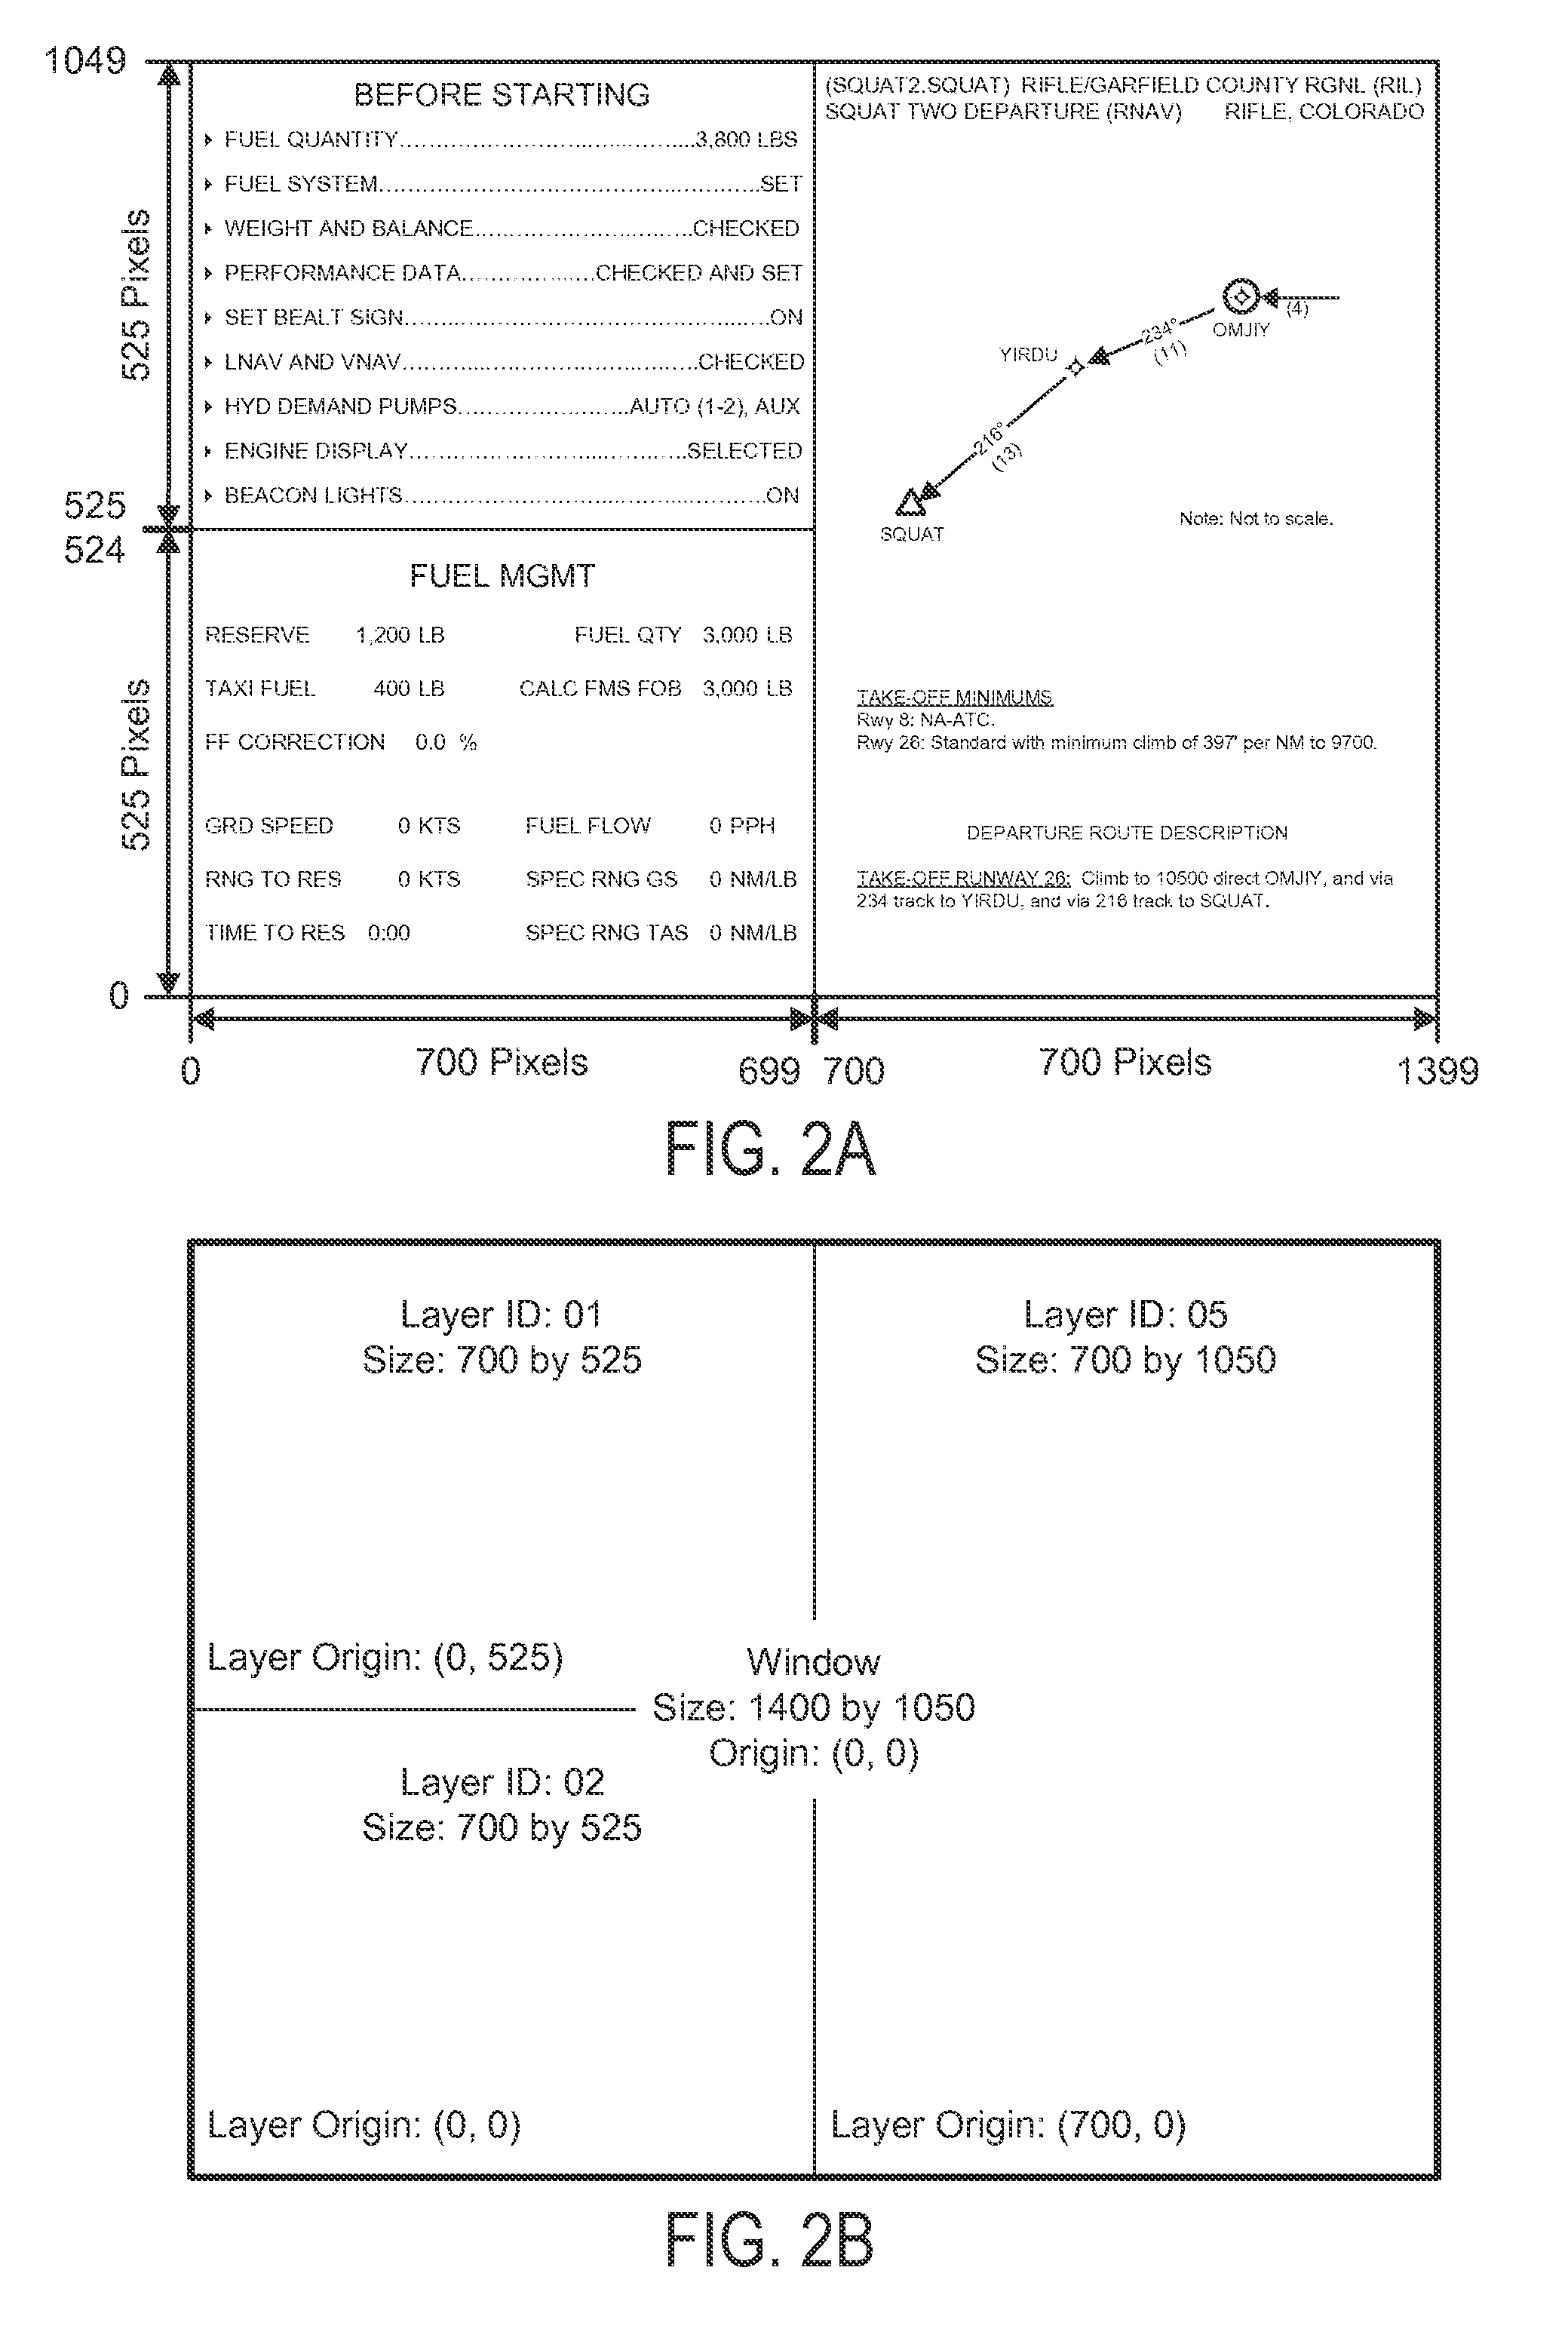 Incorporating virtual network computing into a cockpit display system for controlling a non-aircraft system